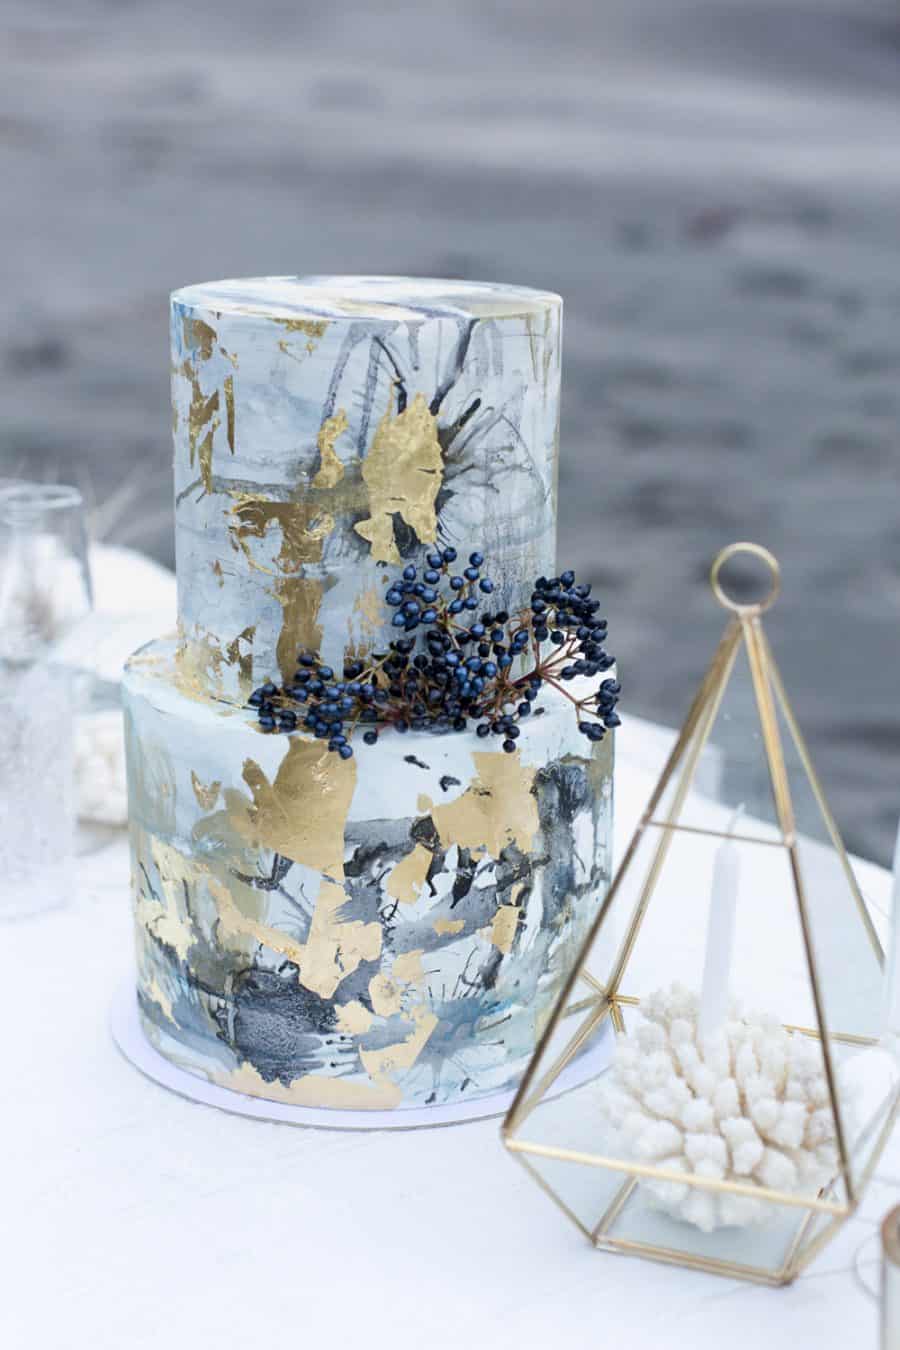 Best wedding cakes of 2016 - inky watercolour cake with gold leaf